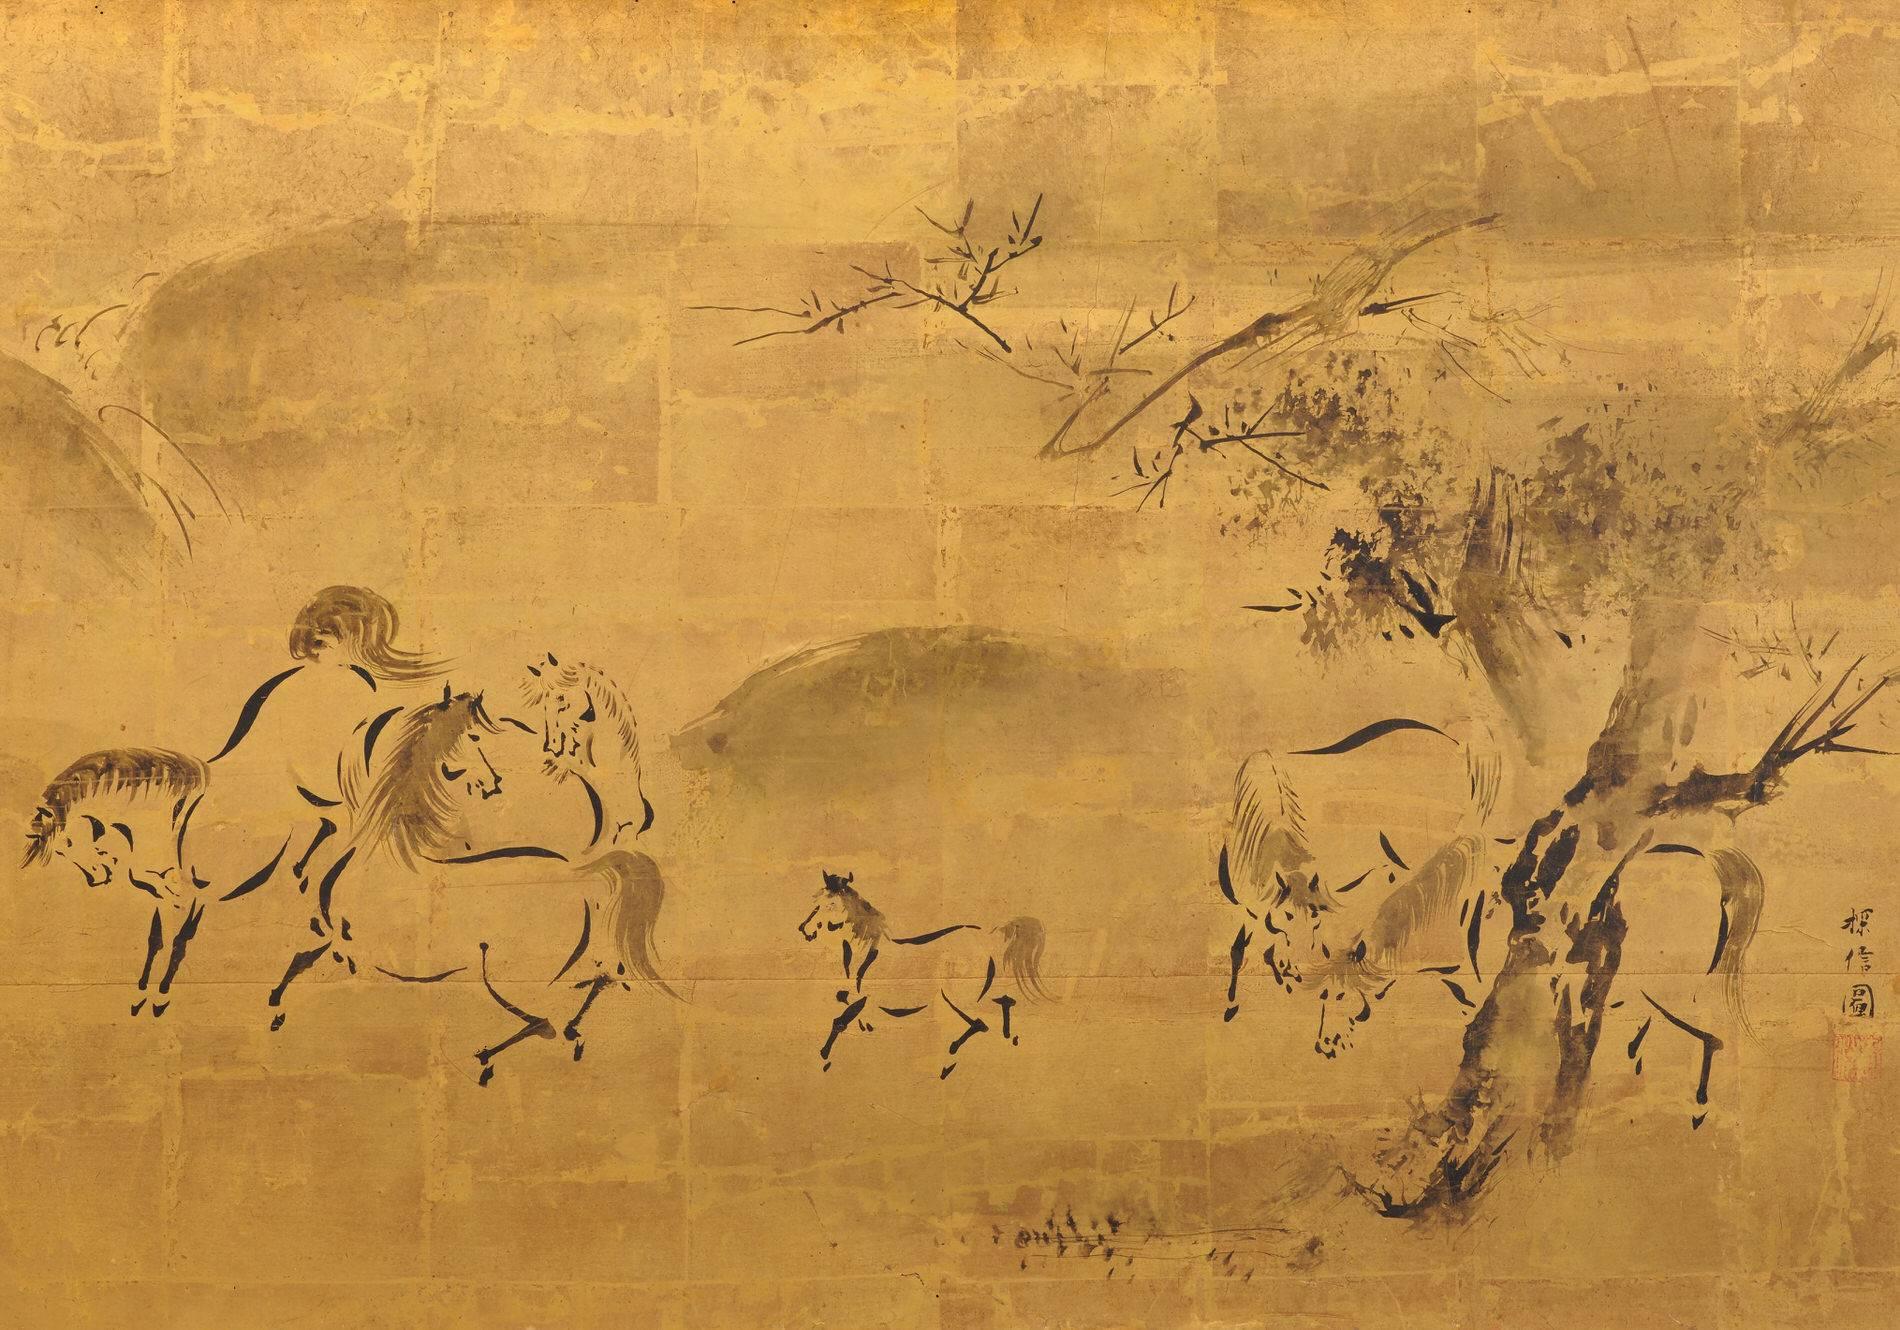 A two-fold tea-ceremony or furosaki Japanese screen from the late 17th or early 18th century by Kano Tanshin Morimasa. Ink on gold leaf.

China originally introduced horse paintings to Japan; the works typically focused on capturing the essence of